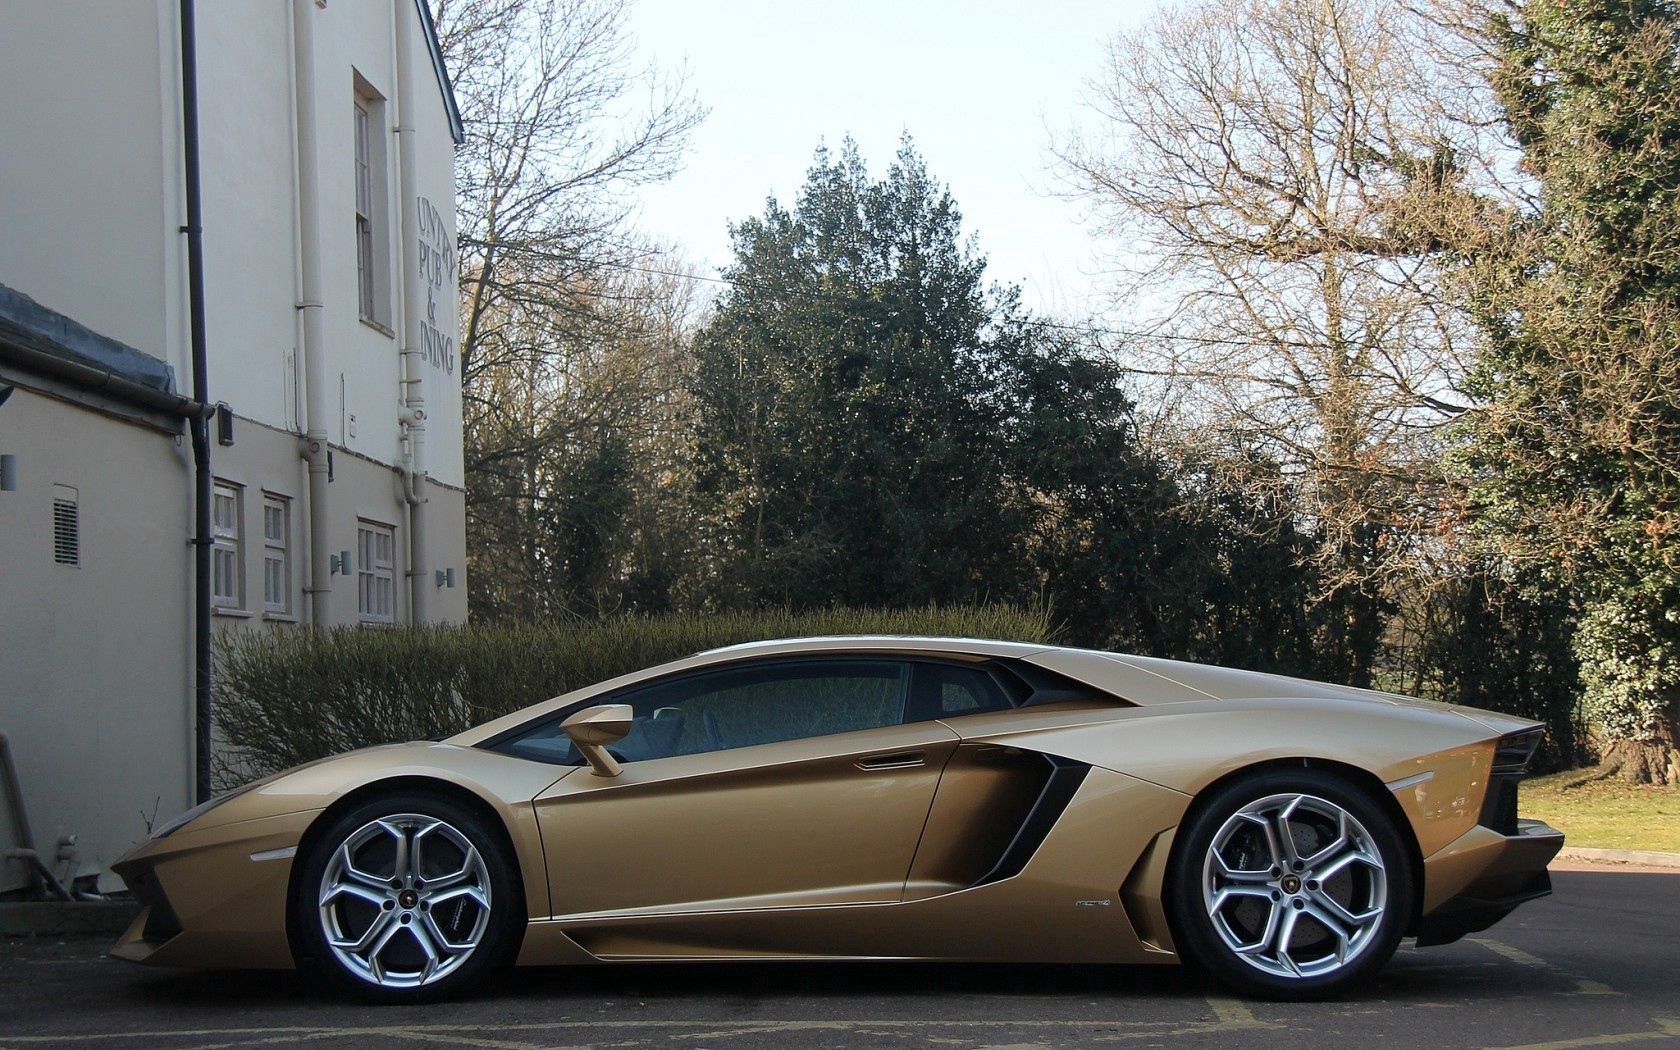 93814 download wallpaper lamborghini, gold, cars, black, golden, profile, disks, drives, aventador screensavers and pictures for free